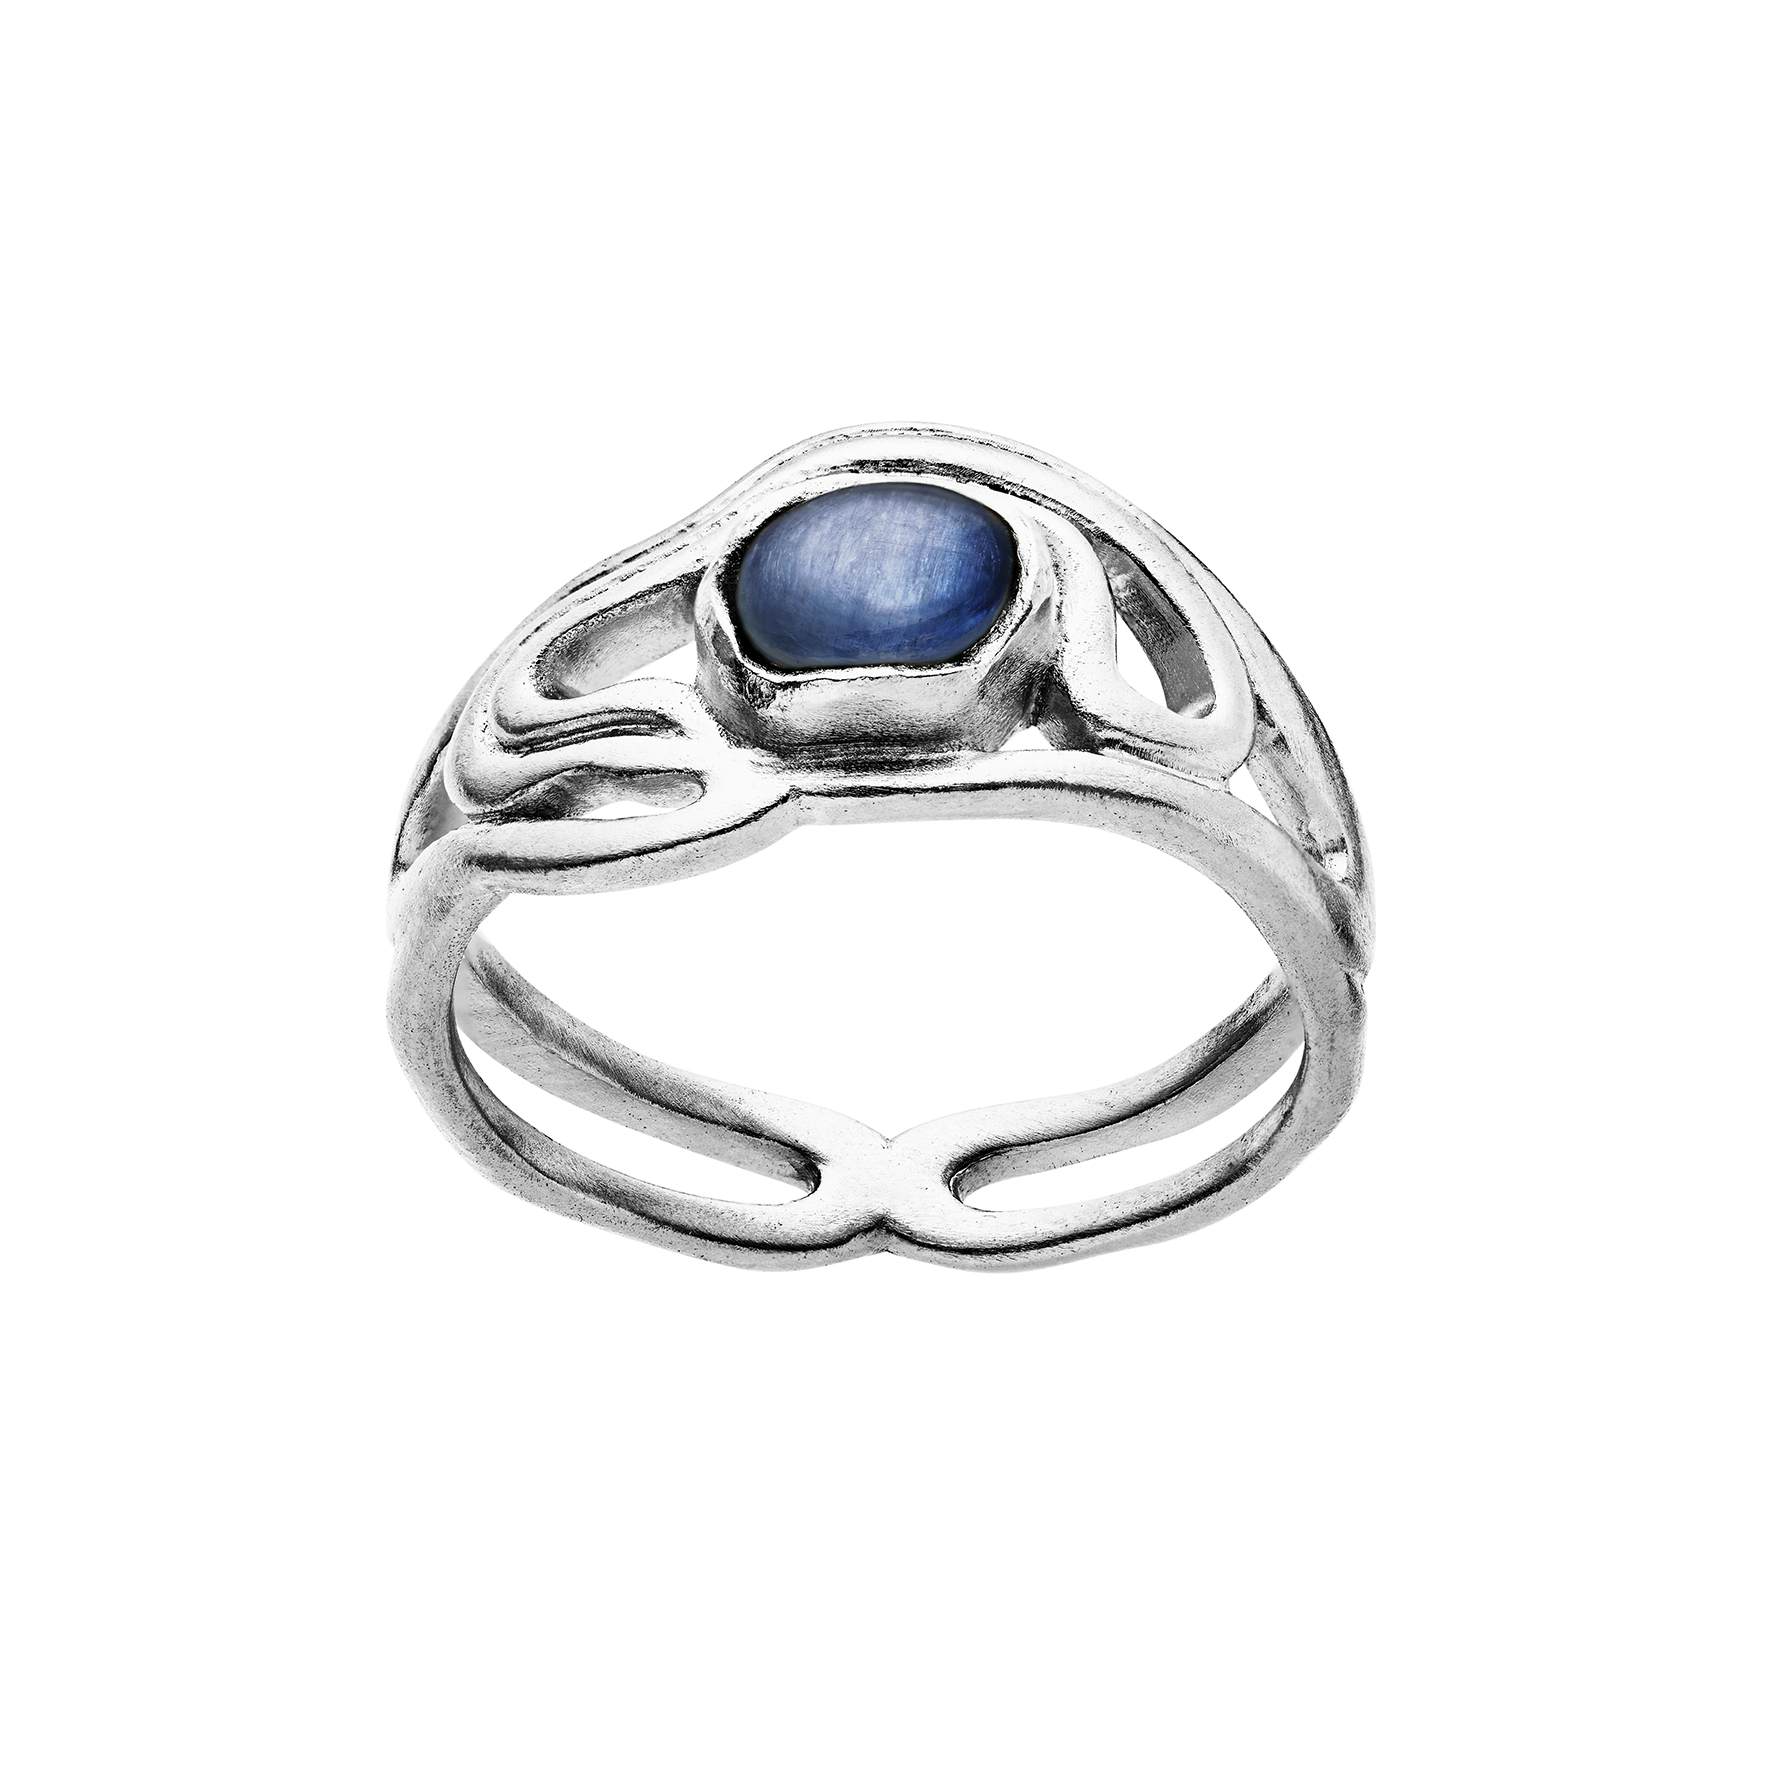 Edith Ring from Maanesten in Silver Sterling 925